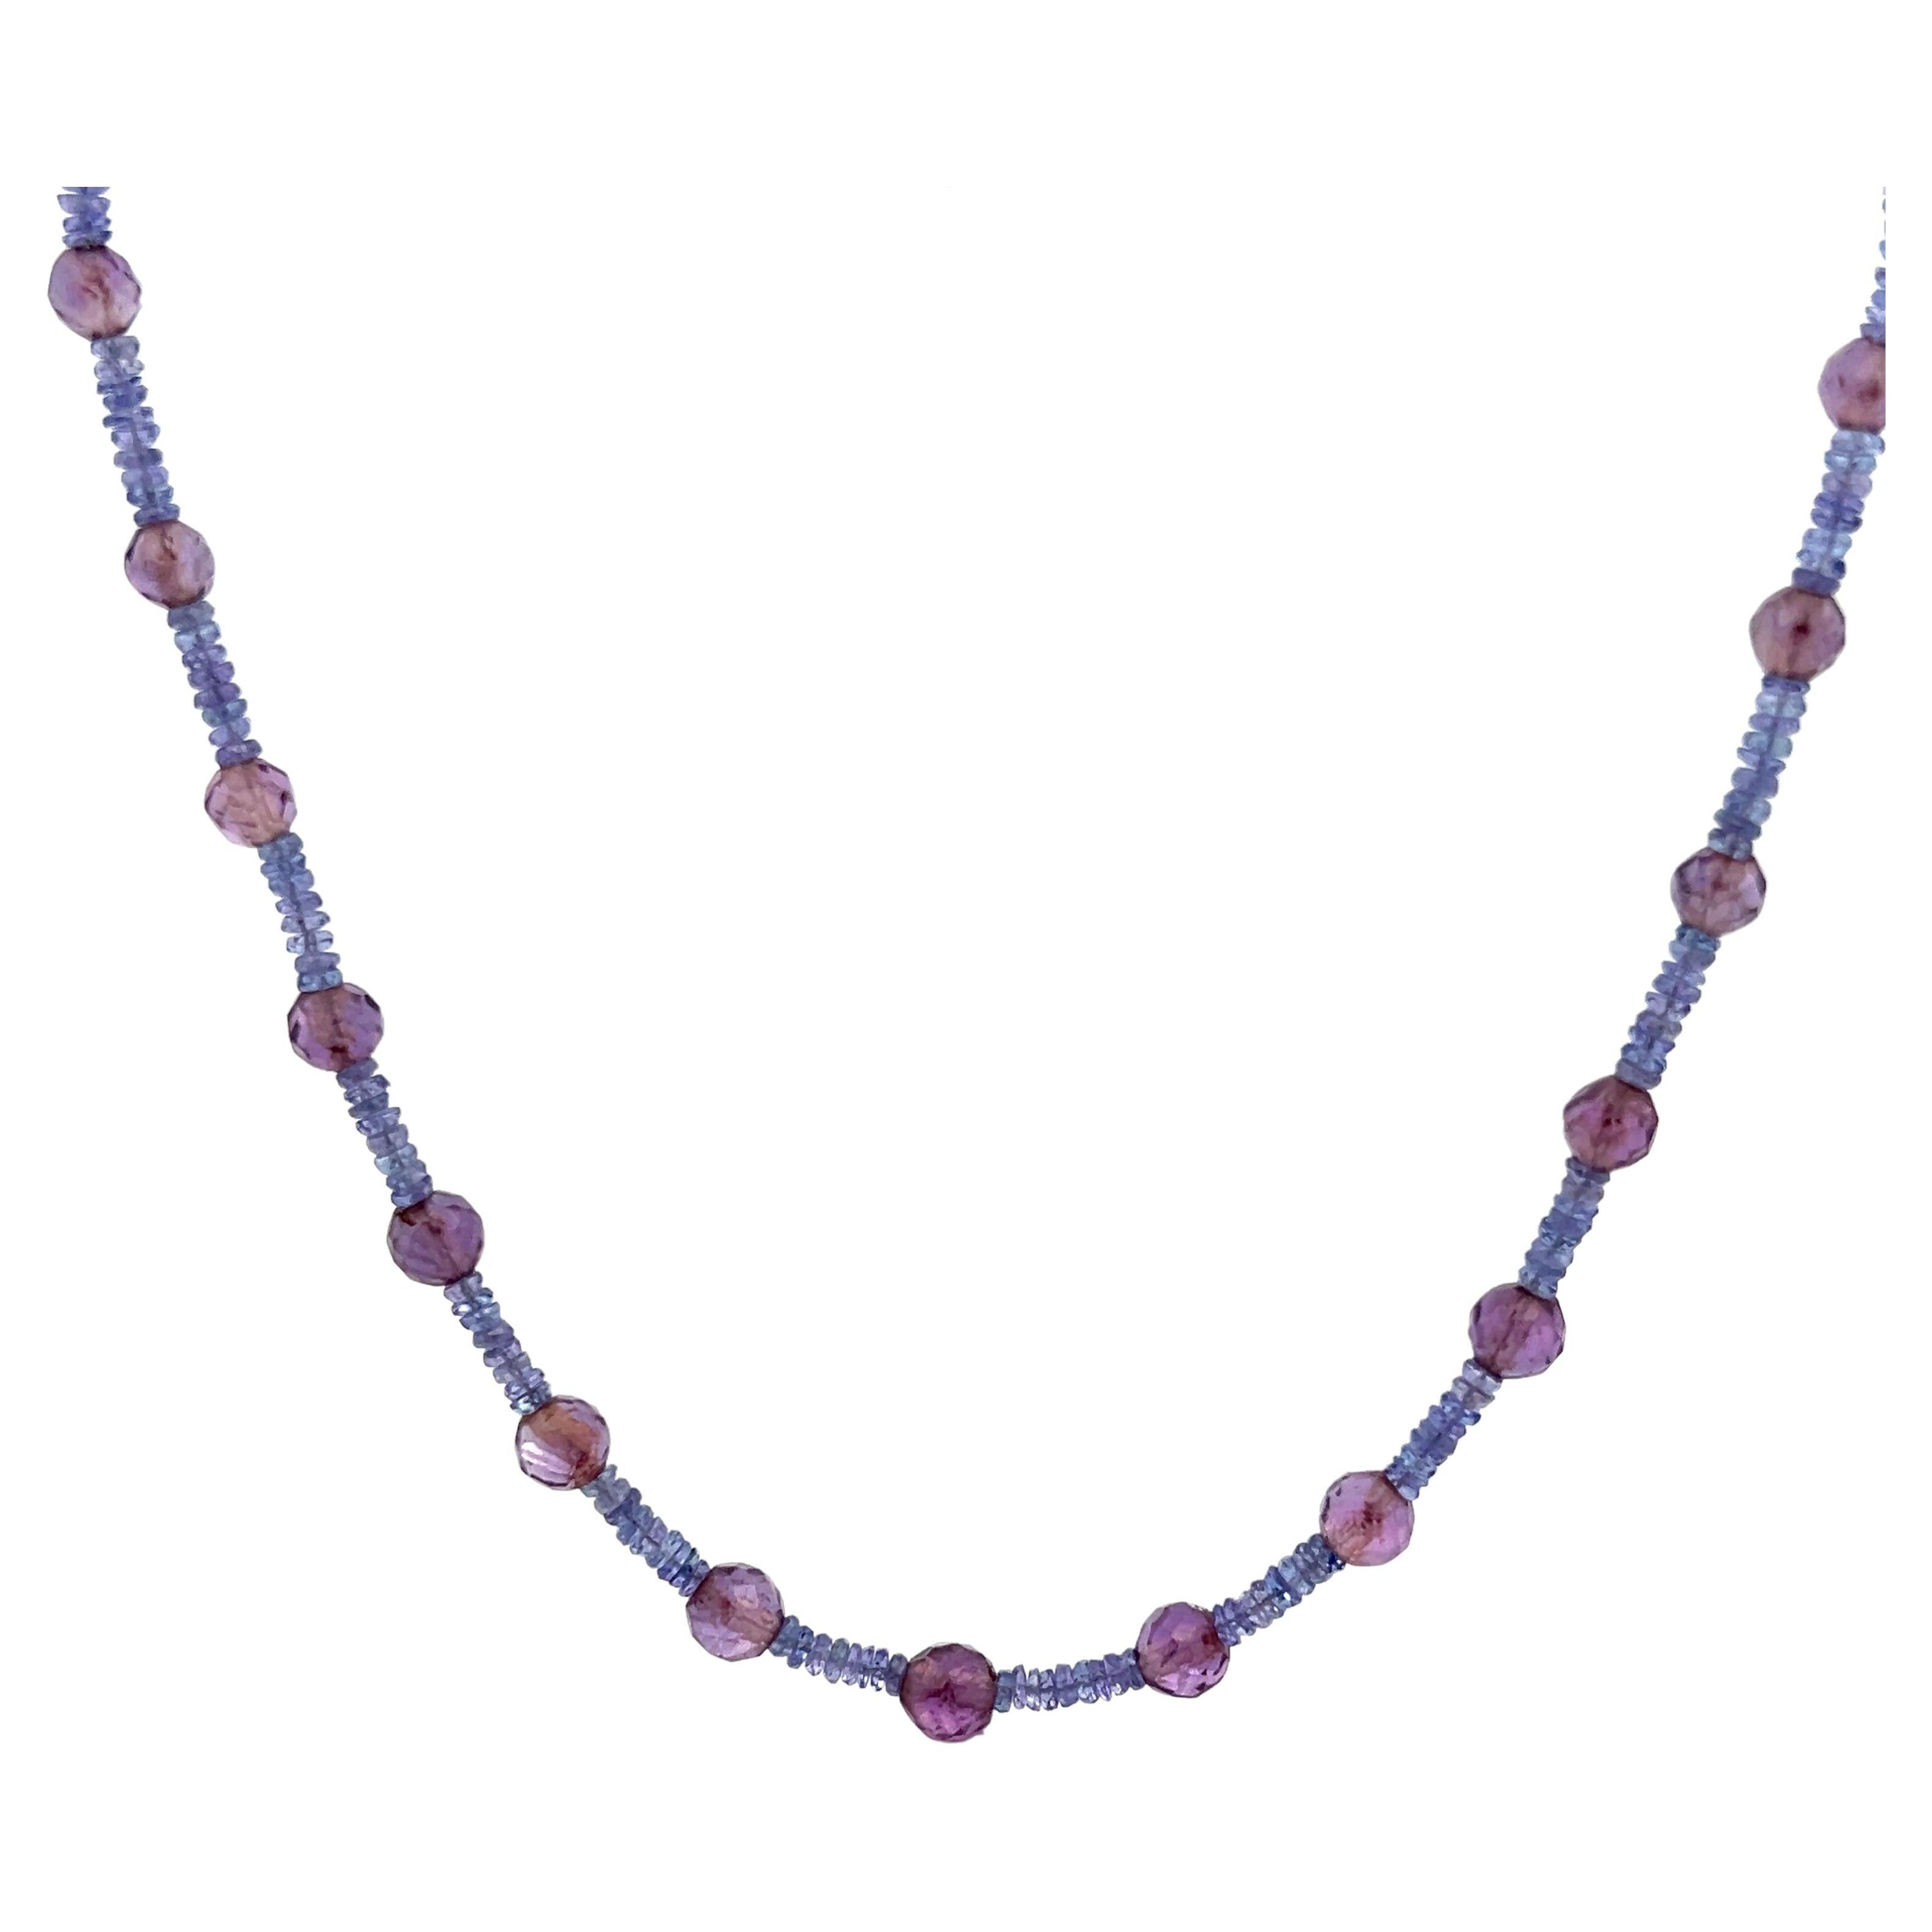 Tanzanite Amethyst Beads Sterling Silver Necklace For Sale